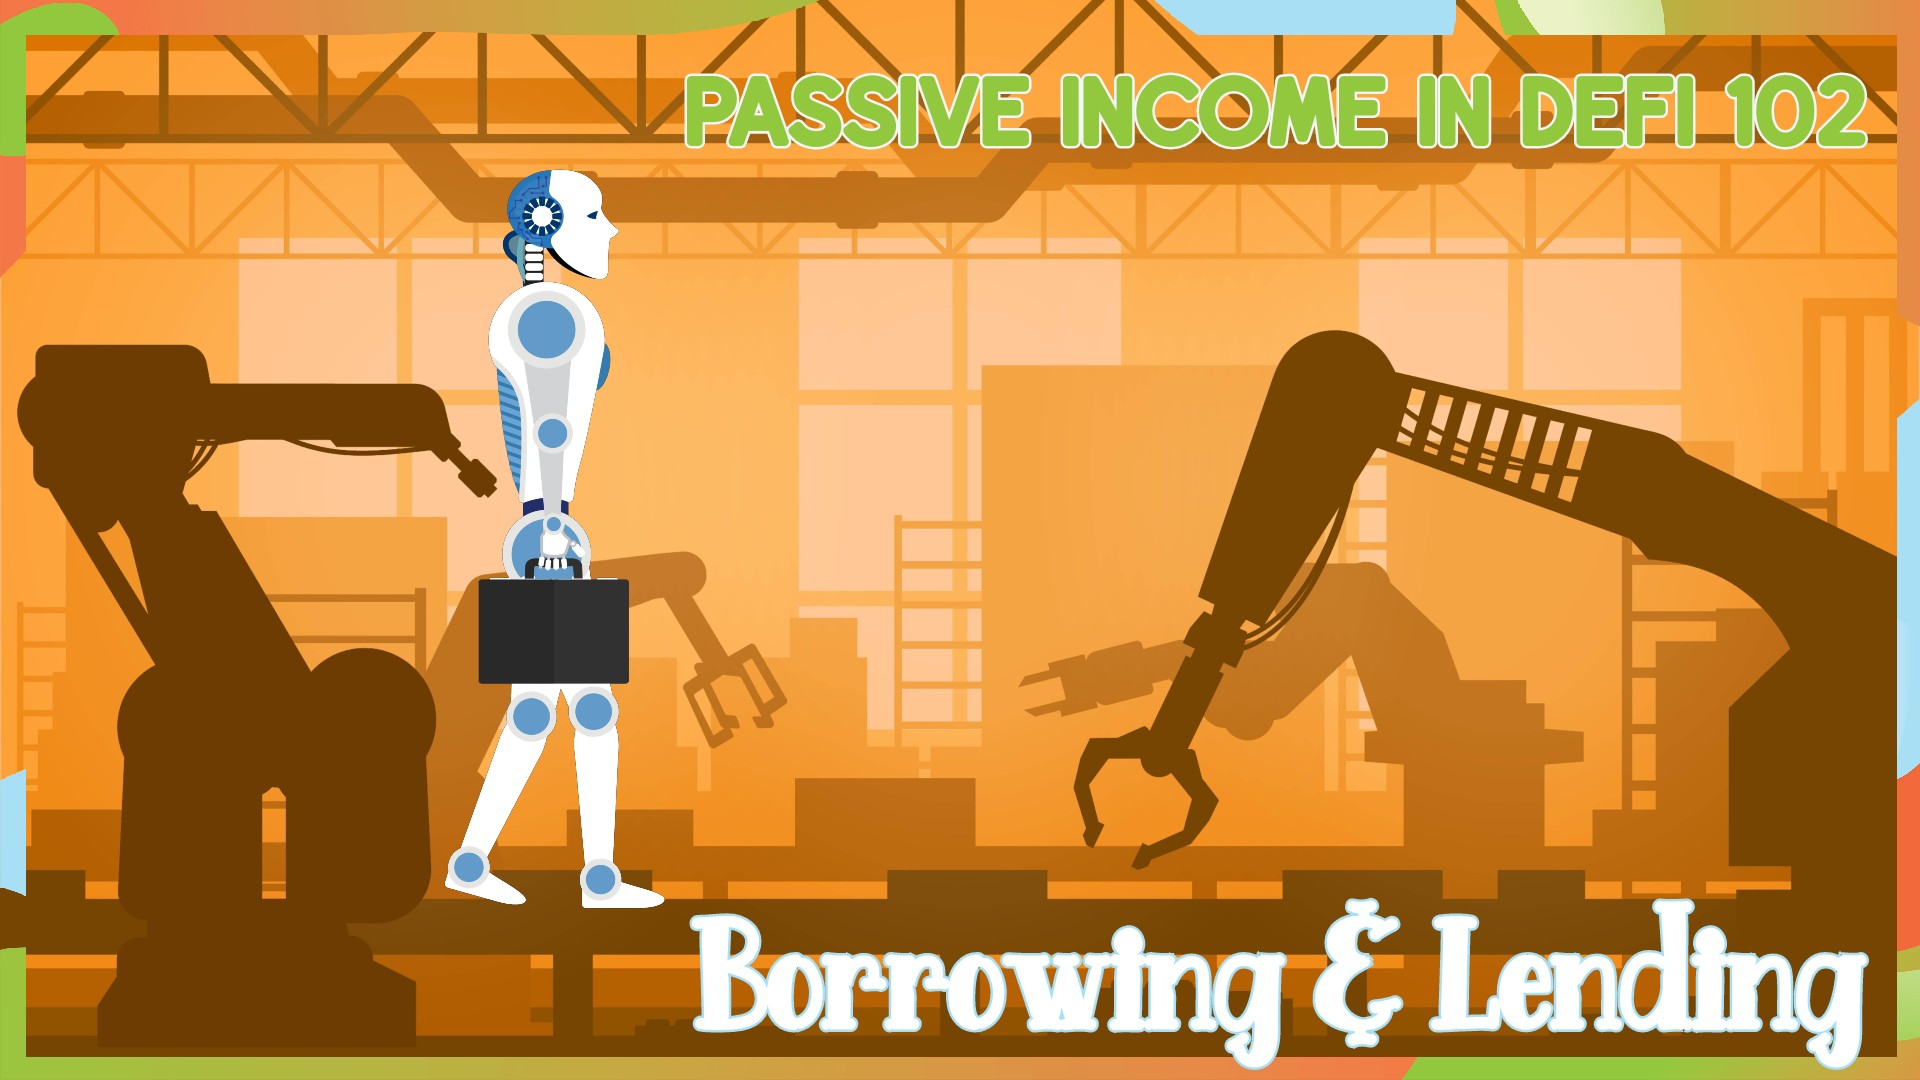 Passive Income in DeFi 102: Borrowing and Lending